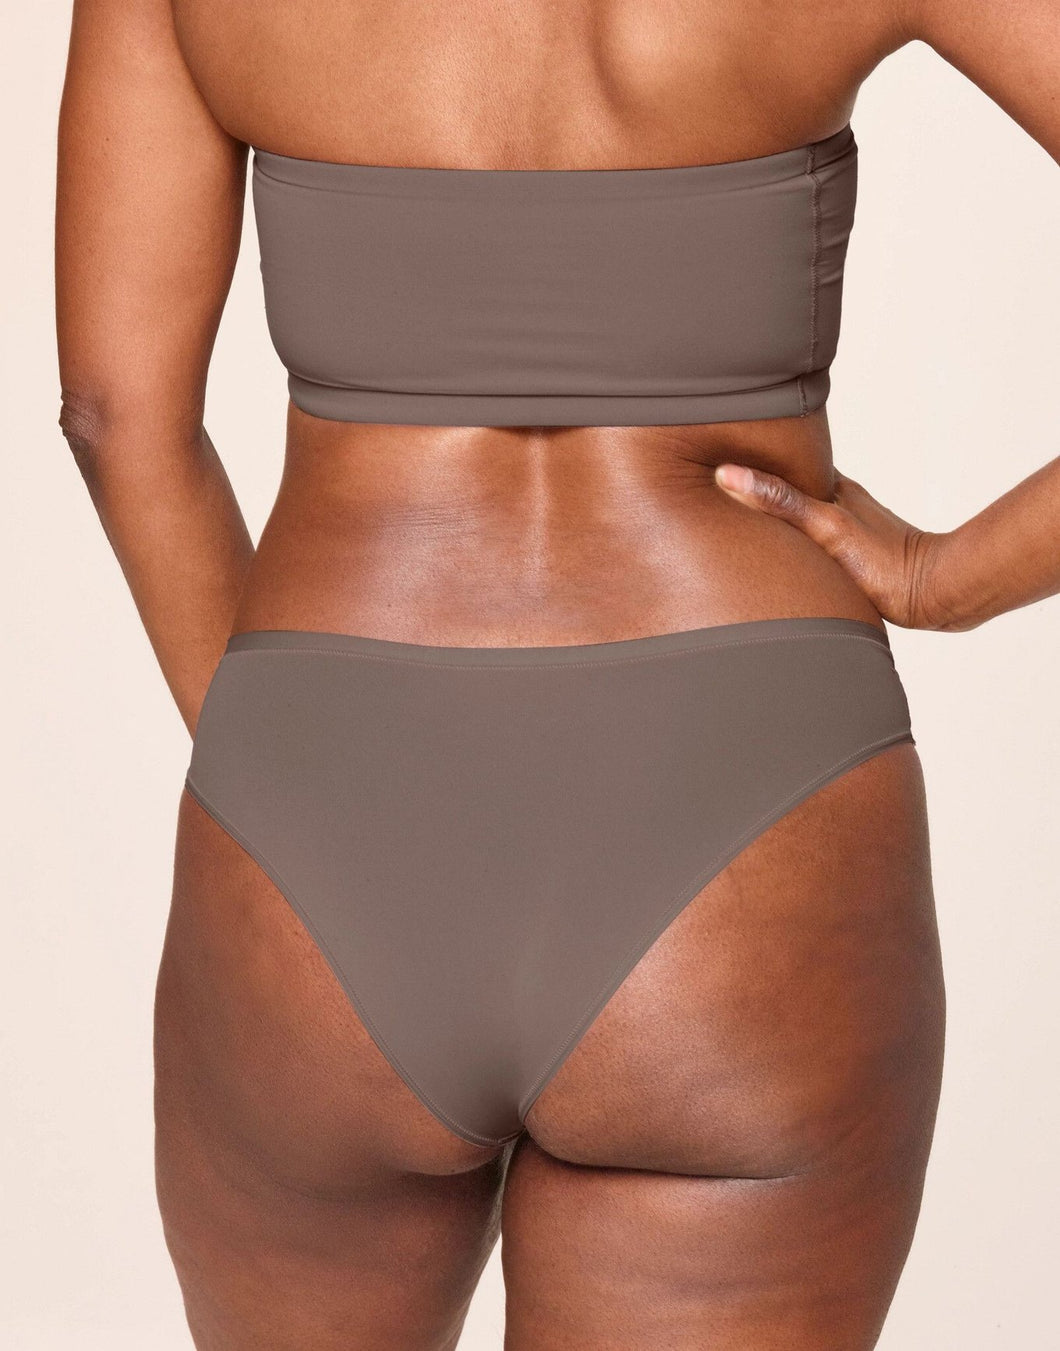 nueskin Mindy in color Deep Taupe and shape midi brief